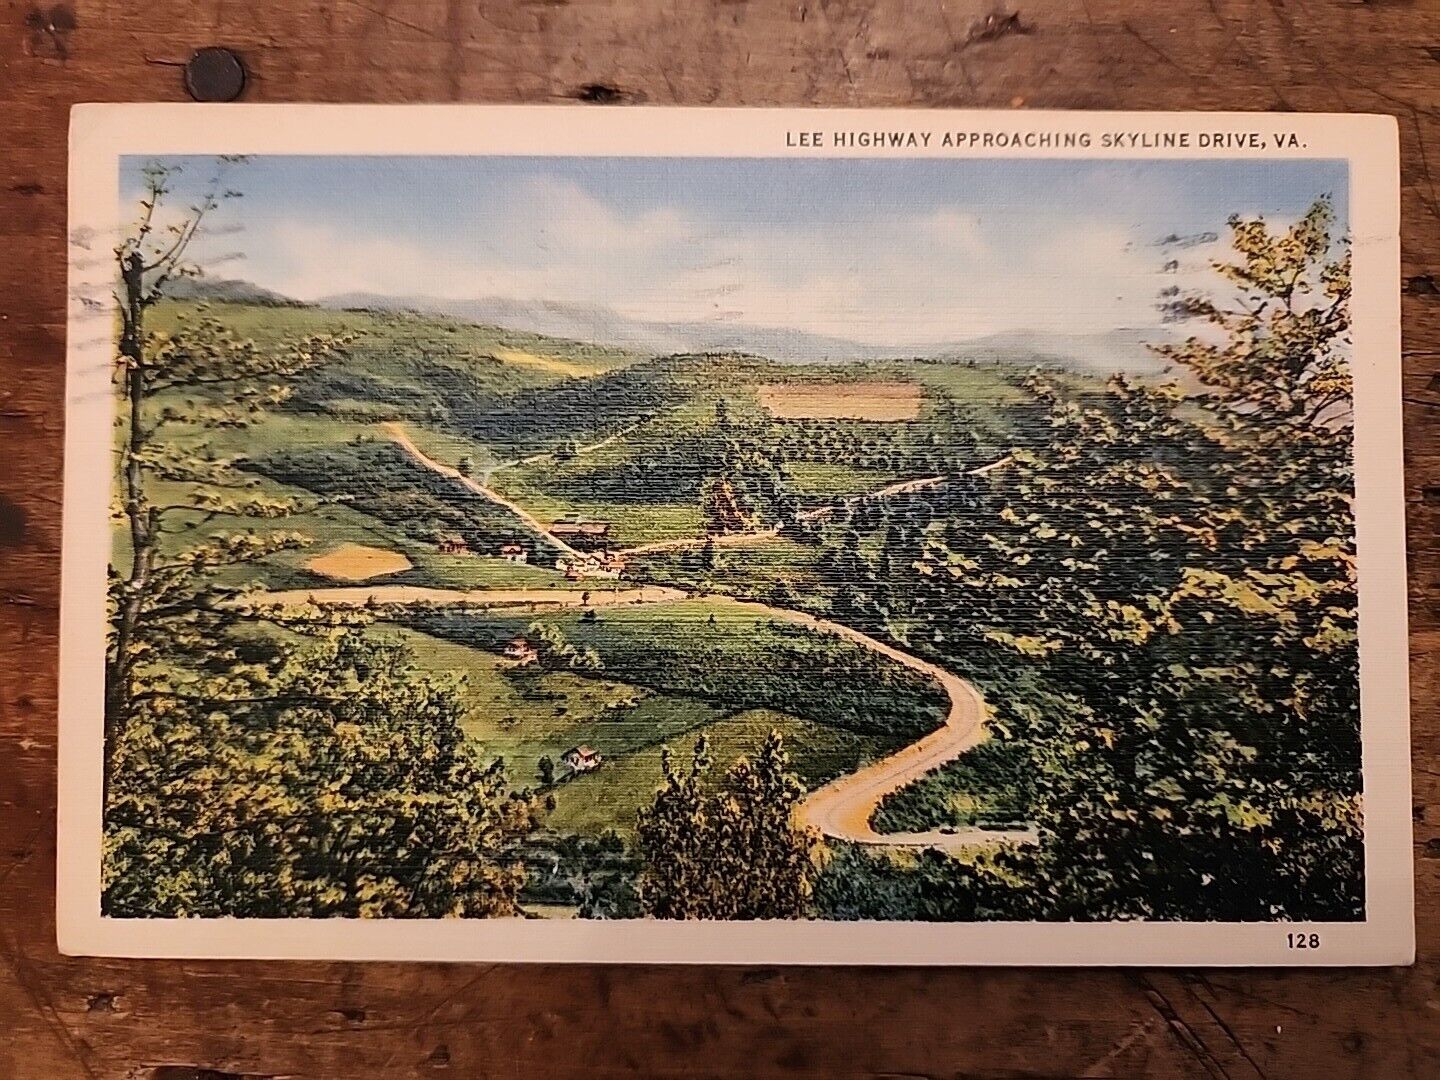 Lee Highway Approaching Skyline Drive, VA posted Linen Postcard 